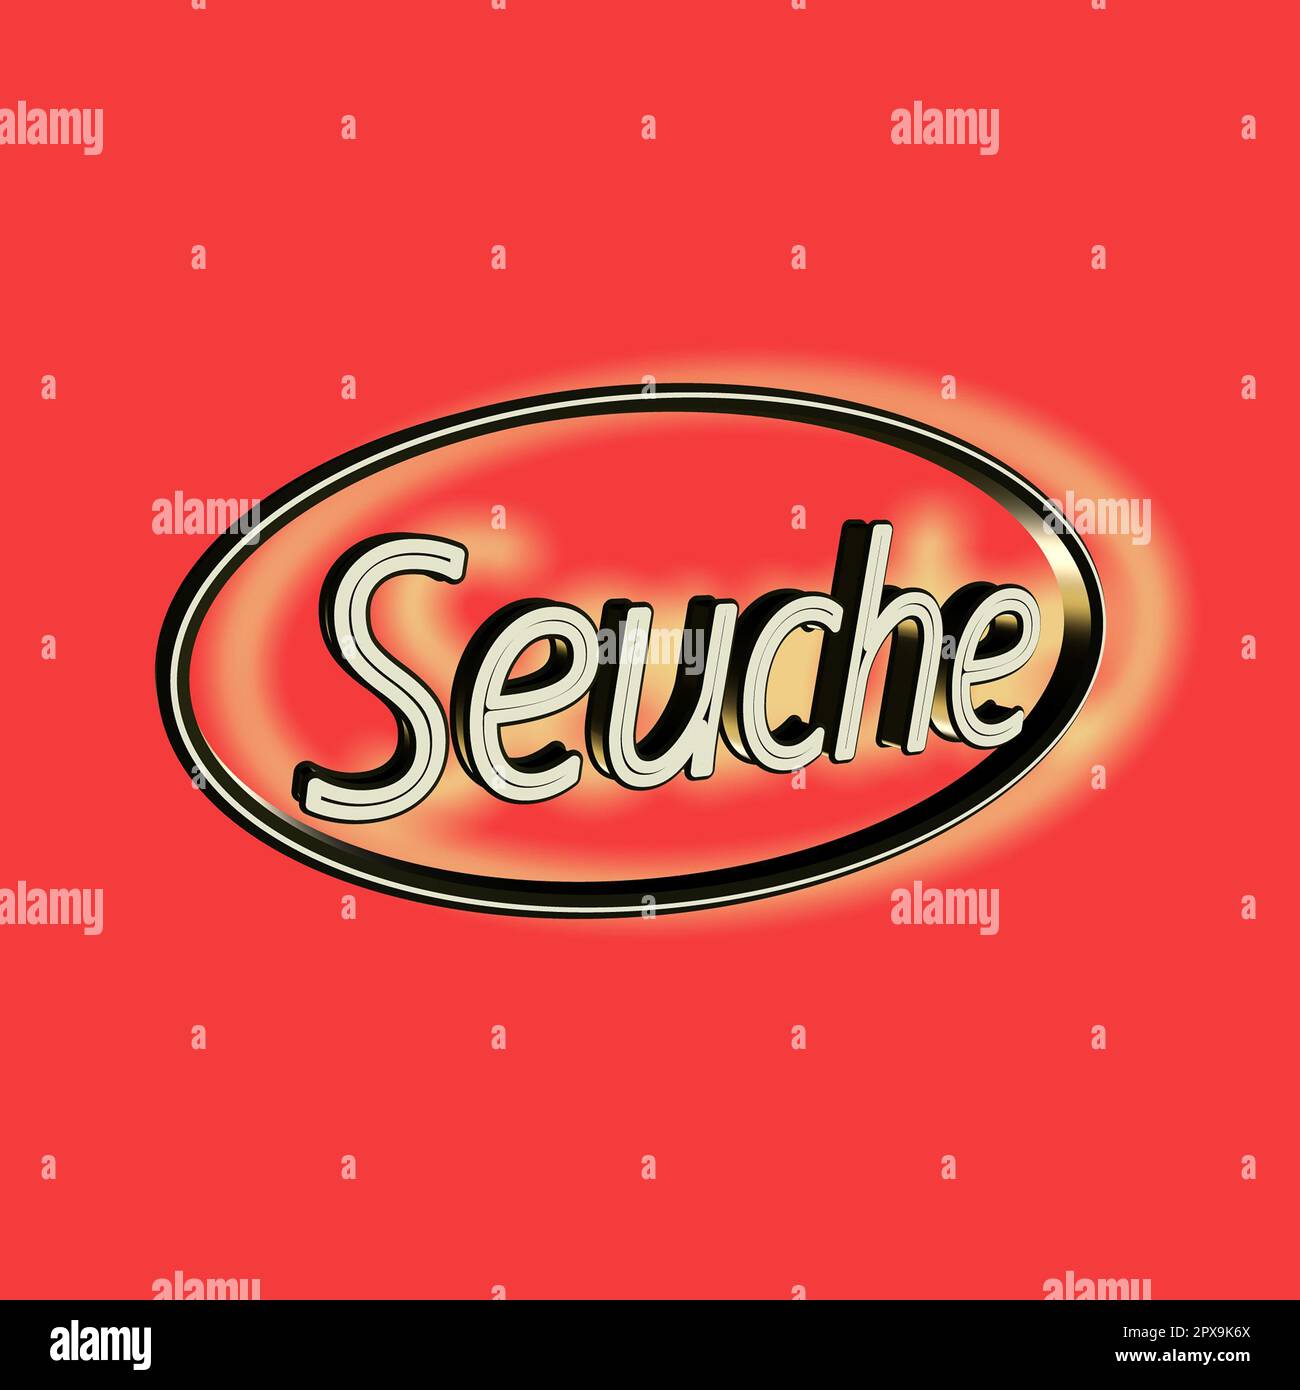 'Seuche' = 'Plague' - word, lettering or text as a 3D illustration, 3D rendering, computer graphics Stock Photo